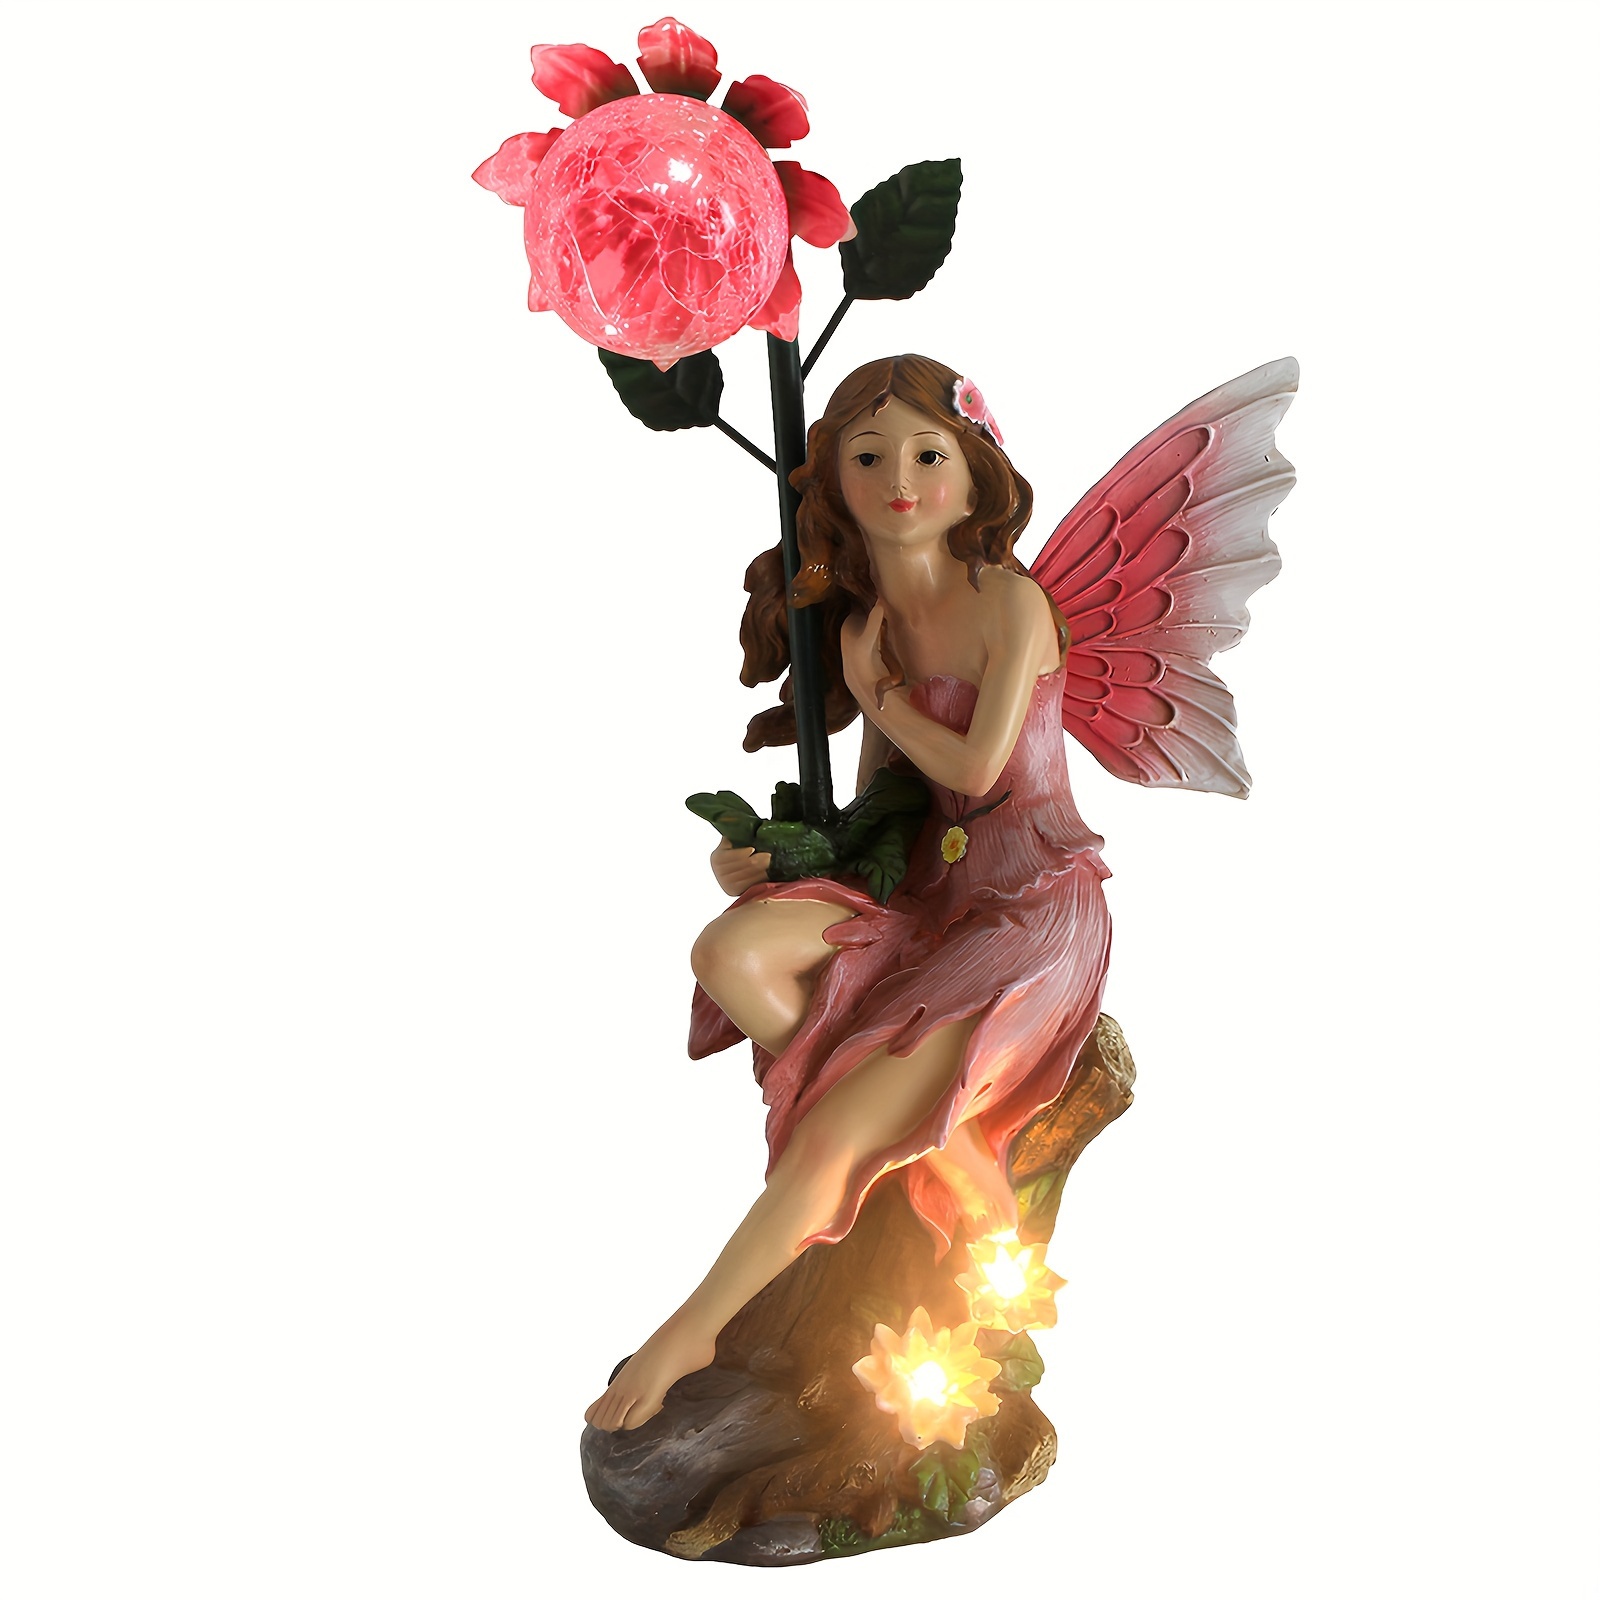 

13.8 Inches Garden Outdoor Statue, Flower Fairy Decor, Solar Powered Resin Figurine, Light Sculpture For Yard Lawn Patio Balcony Decoration, Color Changing, Housewarming Gift